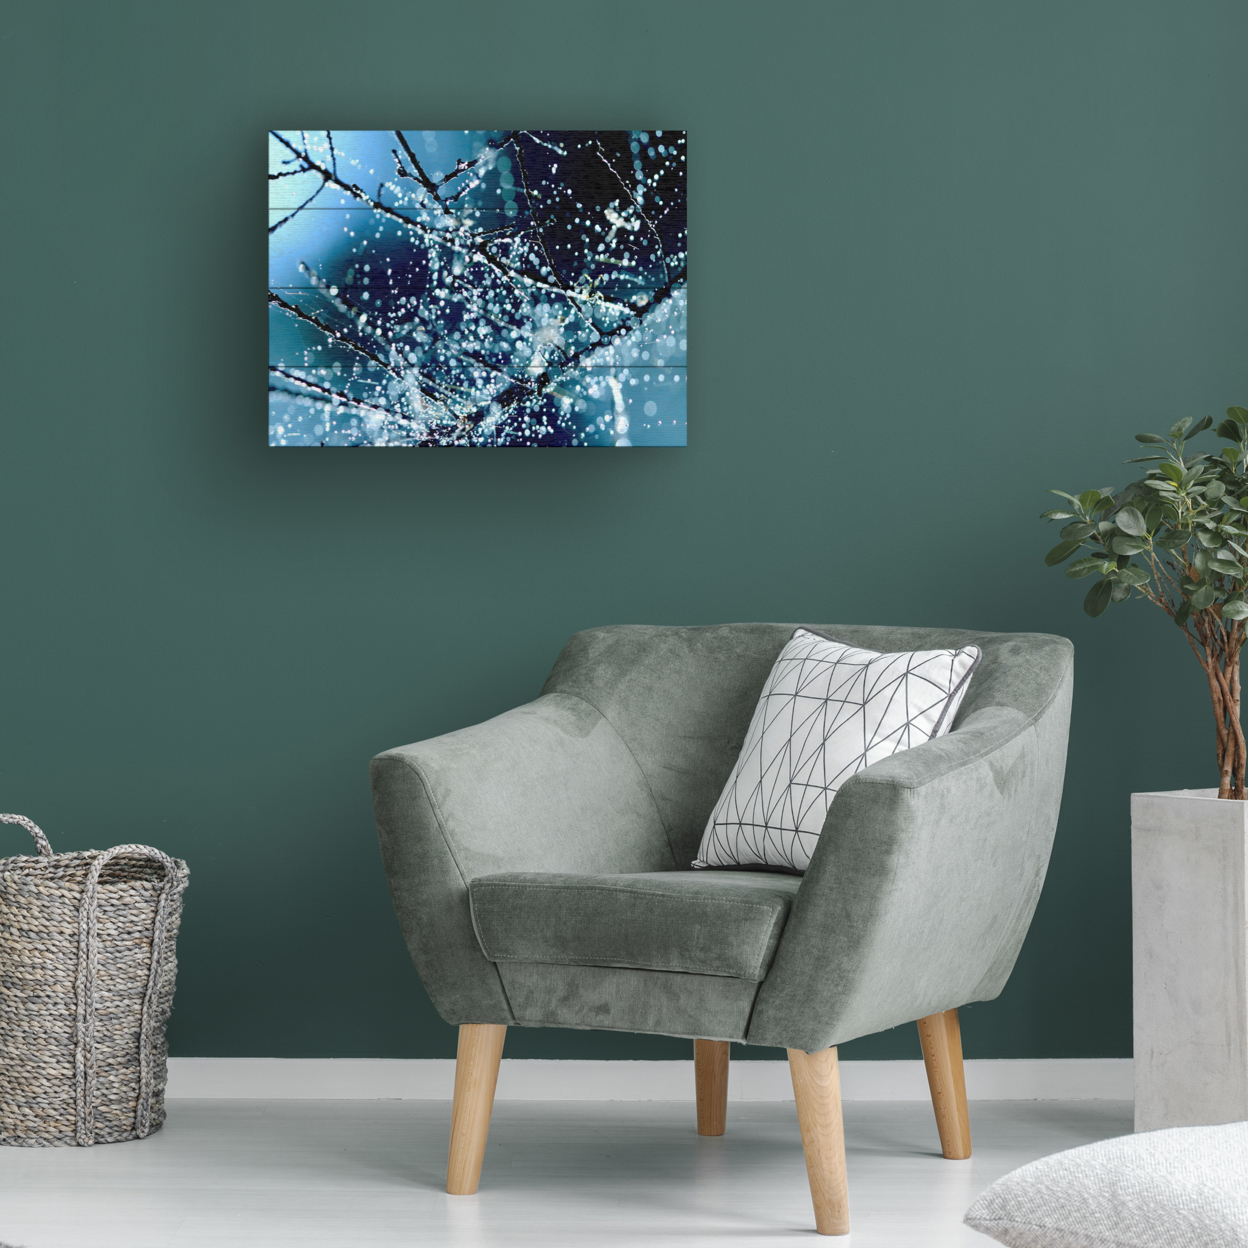 Wall Art 12 X 16 Inches Titled Blue Rhapsody Ready To Hang Printed On Wooden Planks